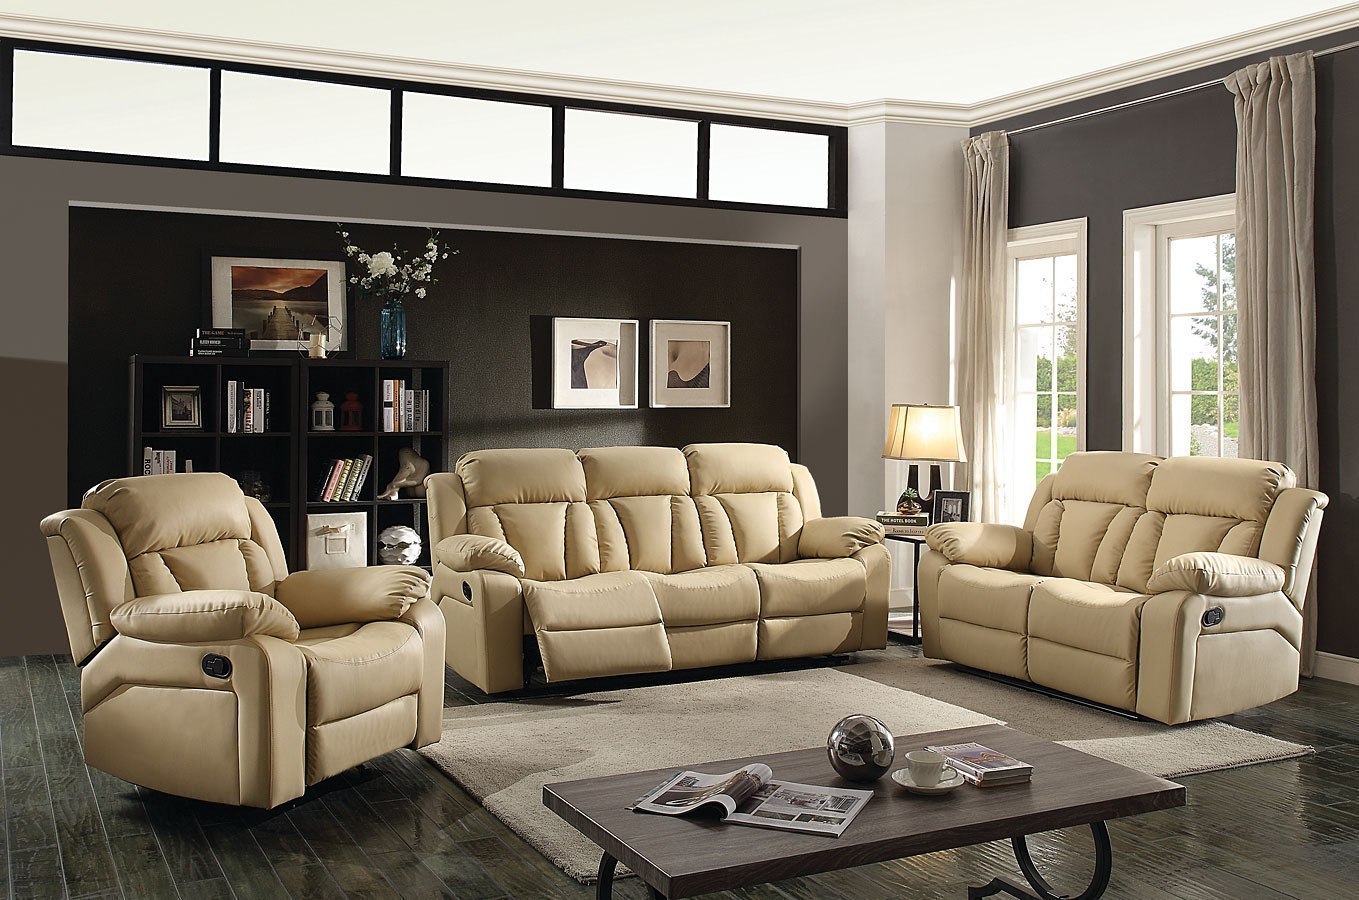 G689 Reclining Living Room Set (Beige) by Glory Furniture